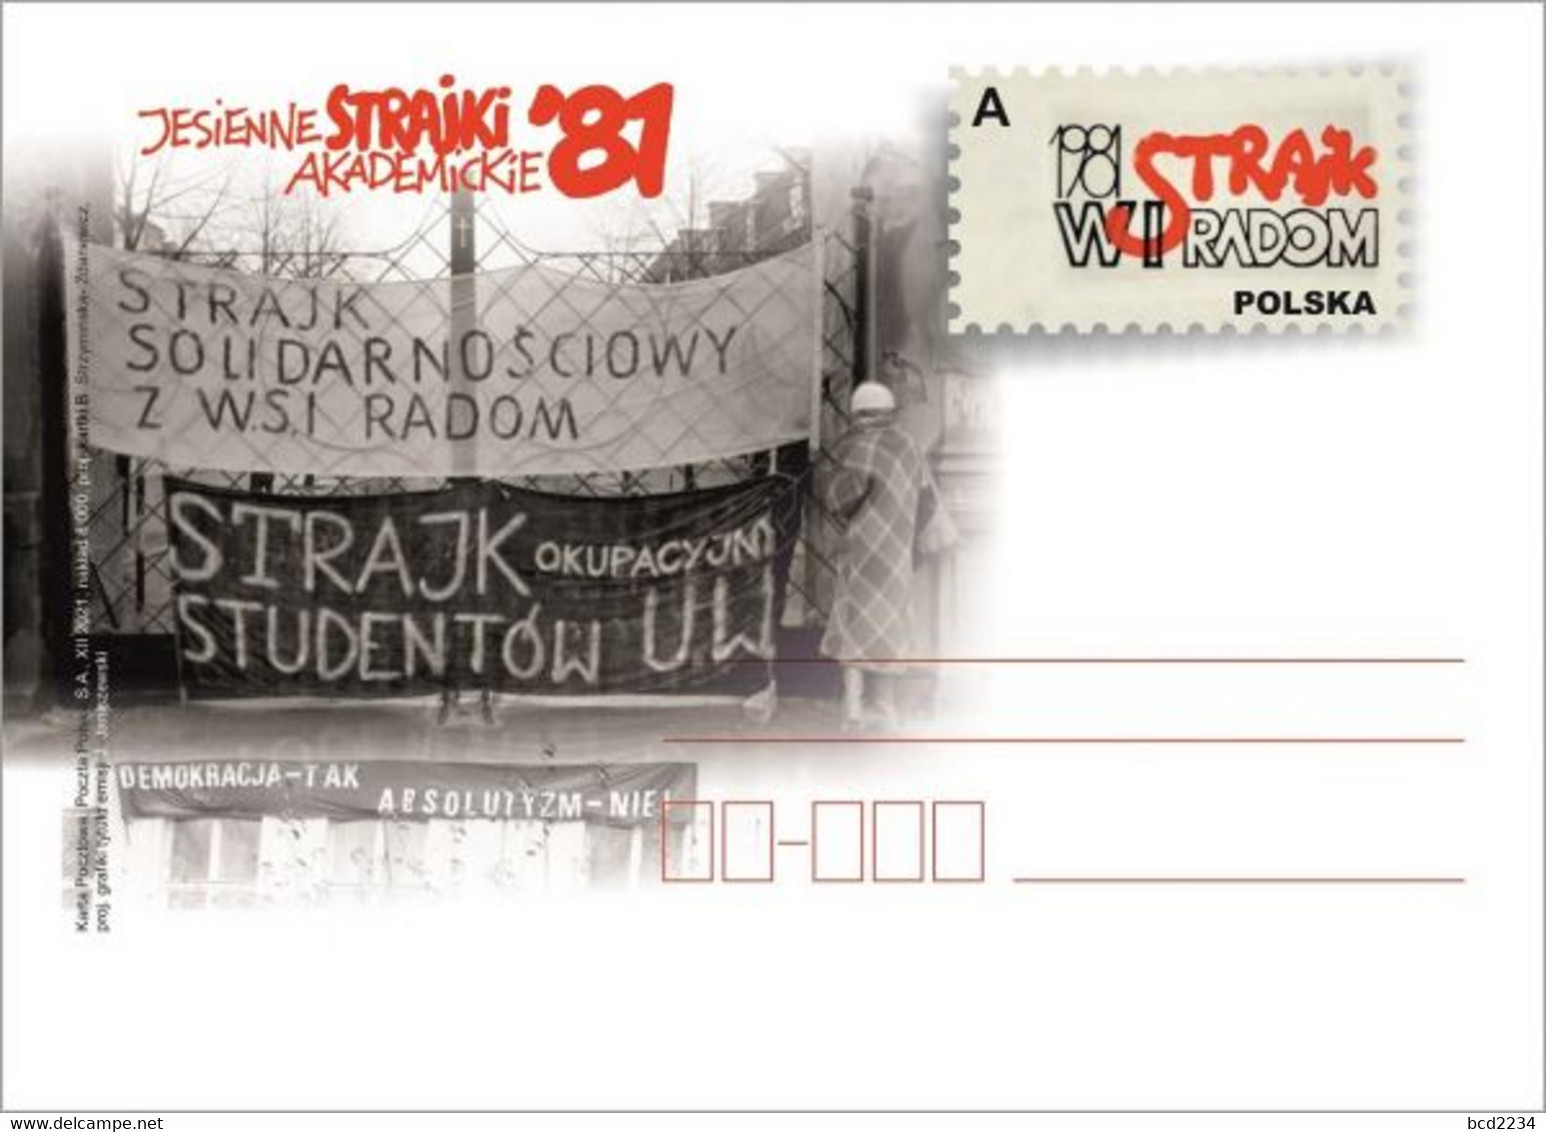 POLAND PC 2021 40TH ANNIVERSARY OF STUDENT WARNING STRIKE SOLIDARITY SOLIDARNOSC POSTAL STATIONERY MINT CP 1948 - Stamped Stationery